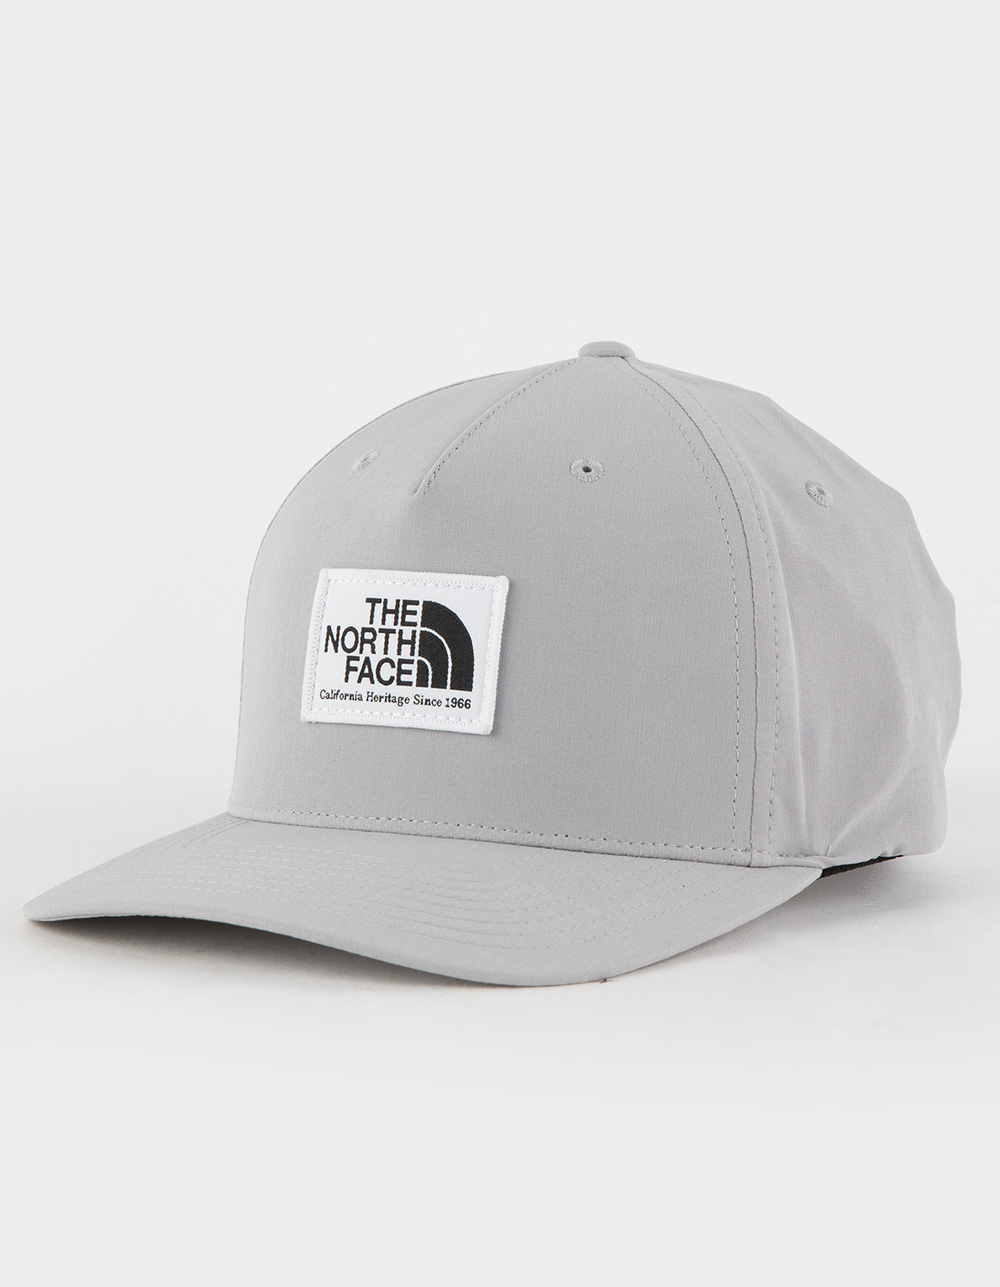 THE NORTH FACE Keep It Tech Flexfit Strapback Hat - GRAY | Tillys